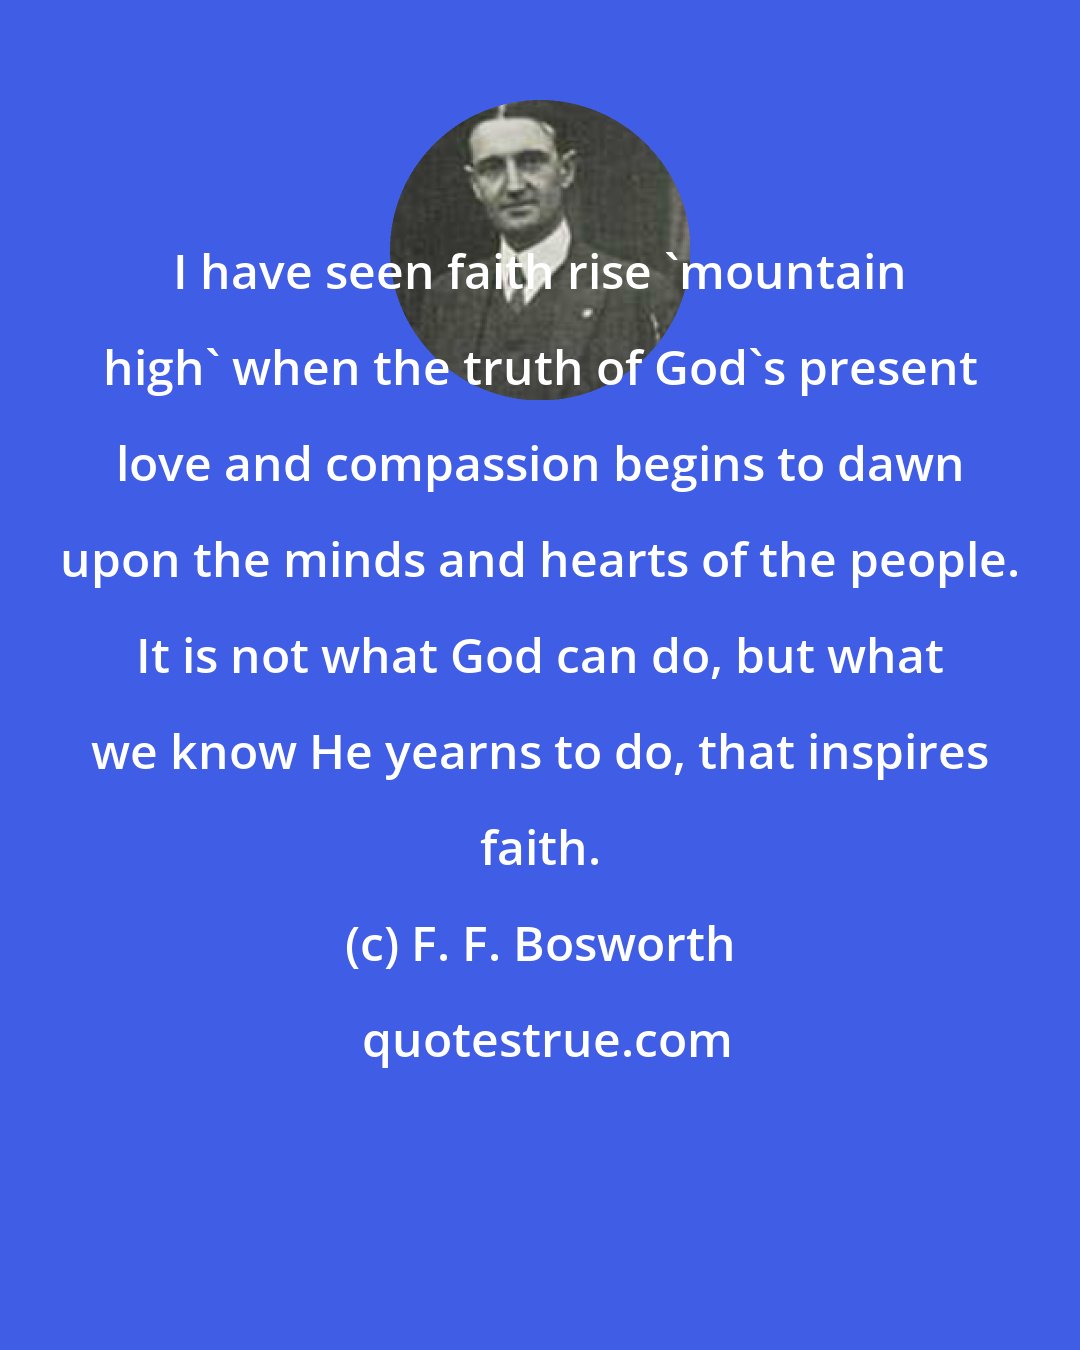 F. F. Bosworth: I have seen faith rise 'mountain high' when the truth of God's present love and compassion begins to dawn upon the minds and hearts of the people. It is not what God can do, but what we know He yearns to do, that inspires faith.